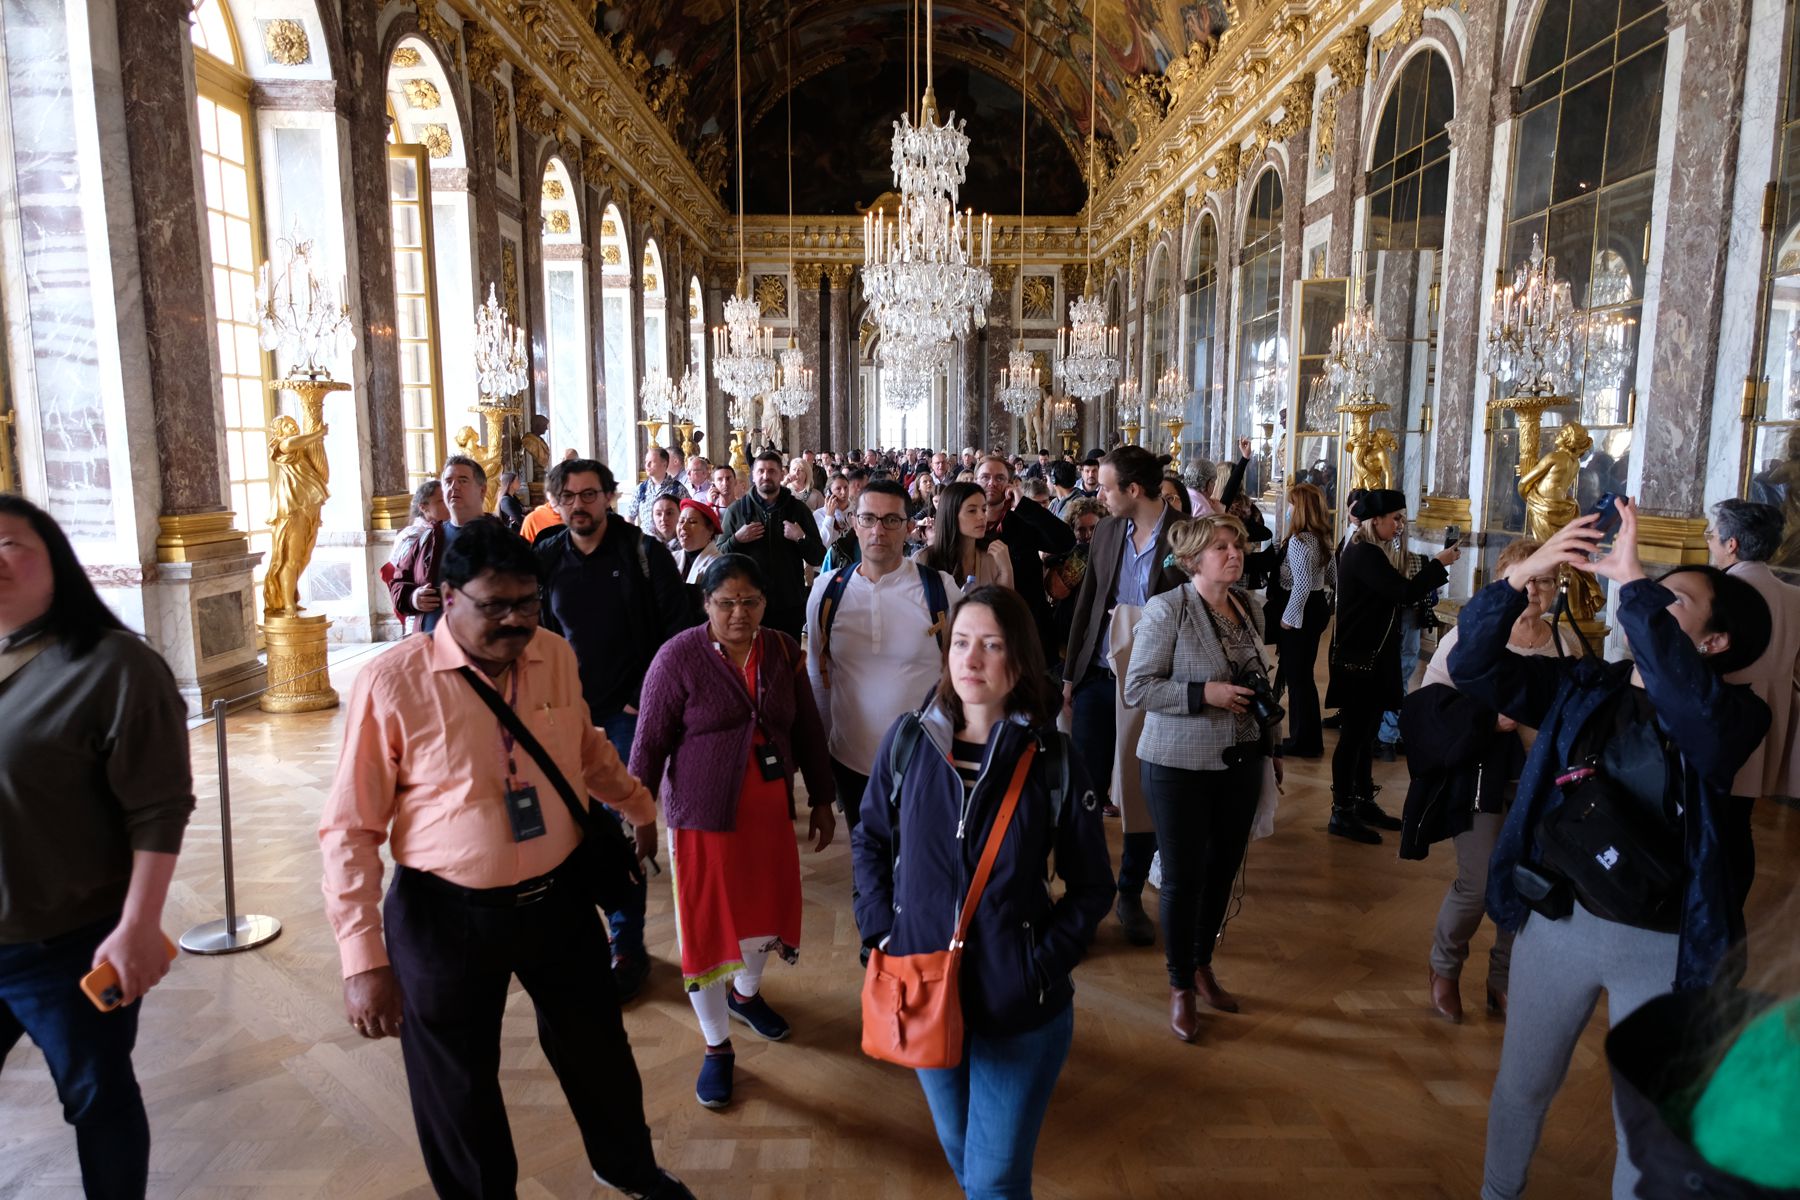 And the crowd inside Versailles.